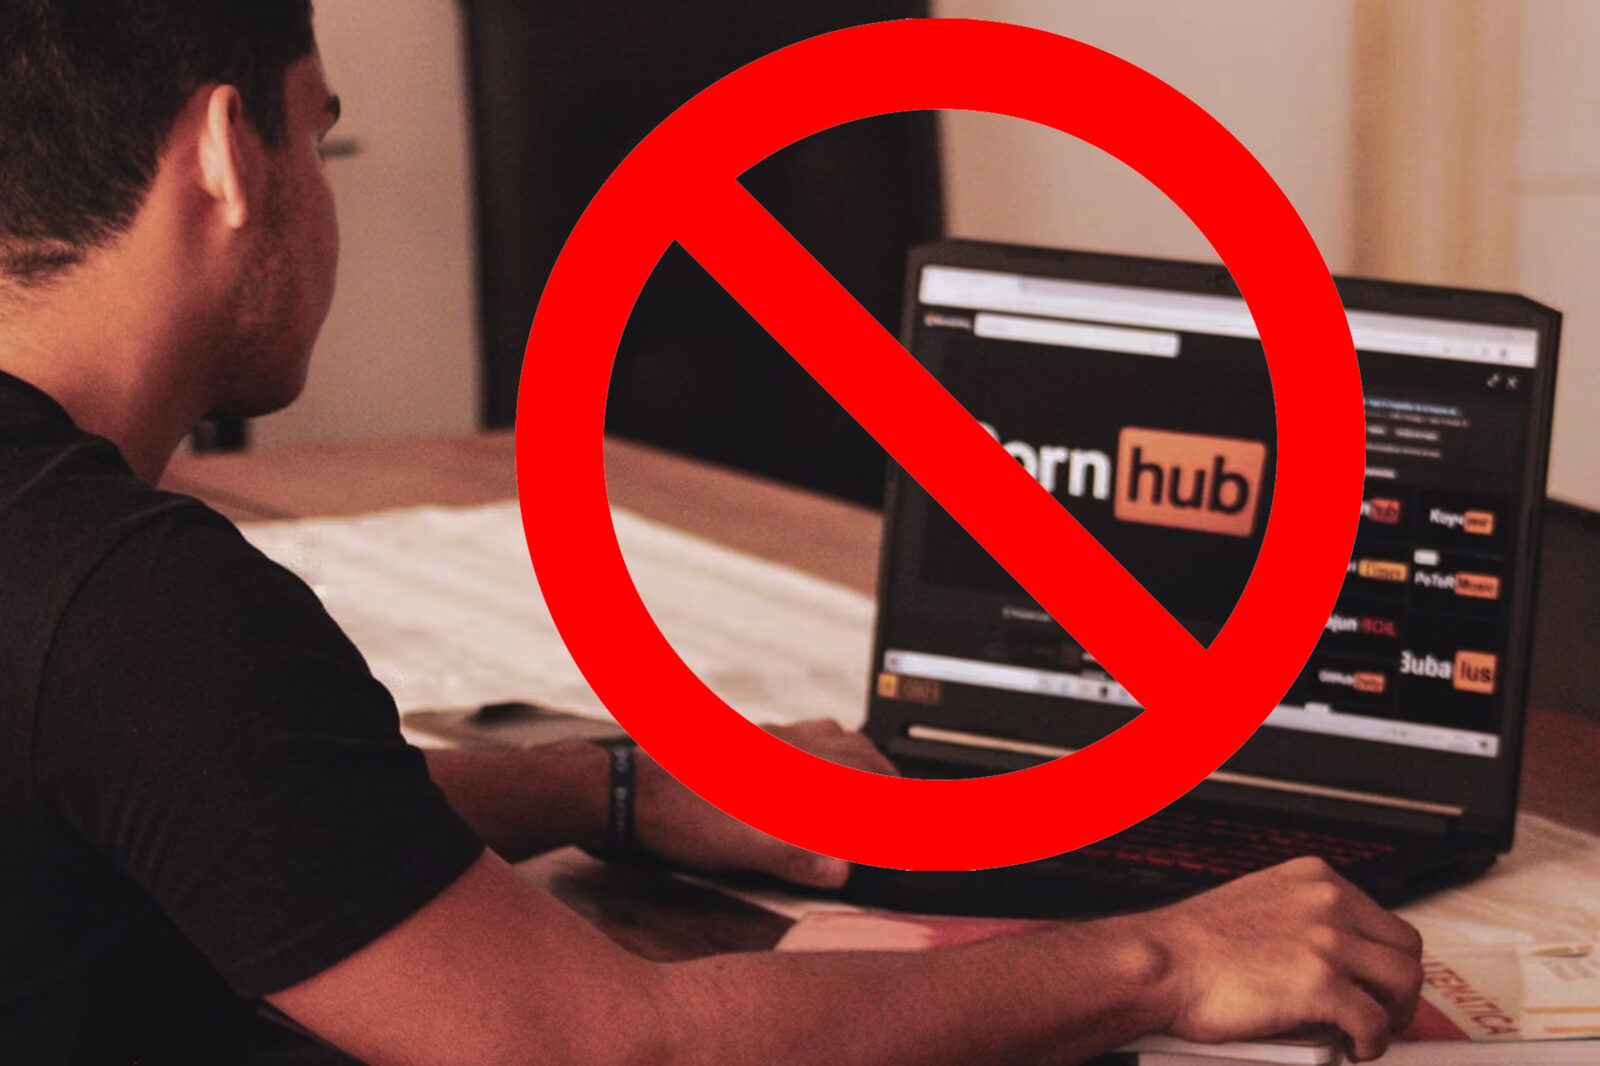 Pornhaub - Pornhub Blocks Access In Utah Because of State's New Age Verification Law -  RELEVANT